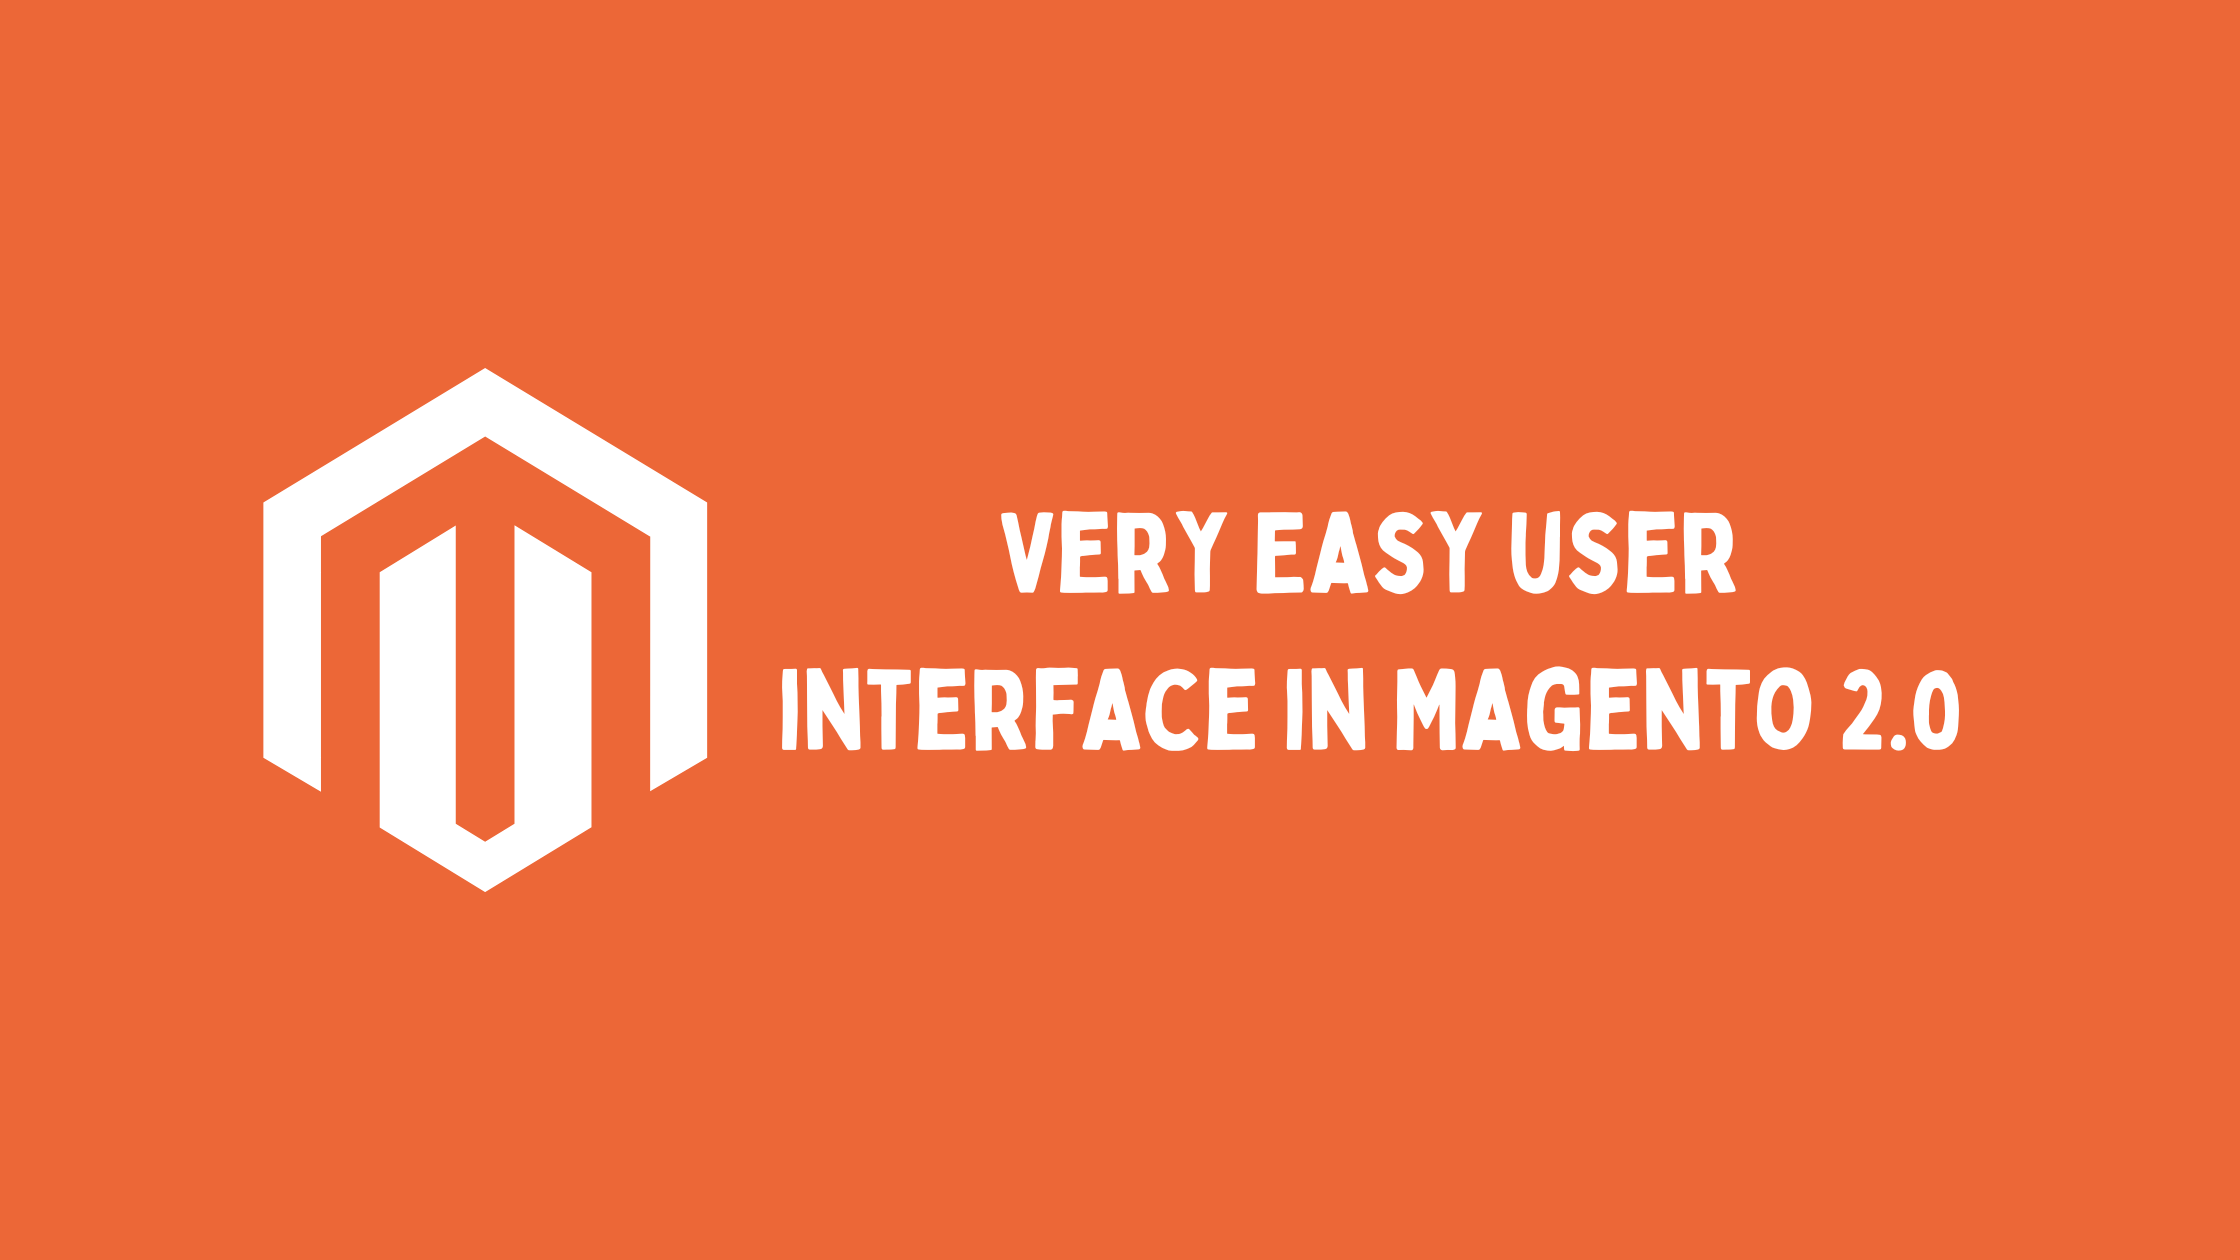 Very Easy user interface in Magento 2.0